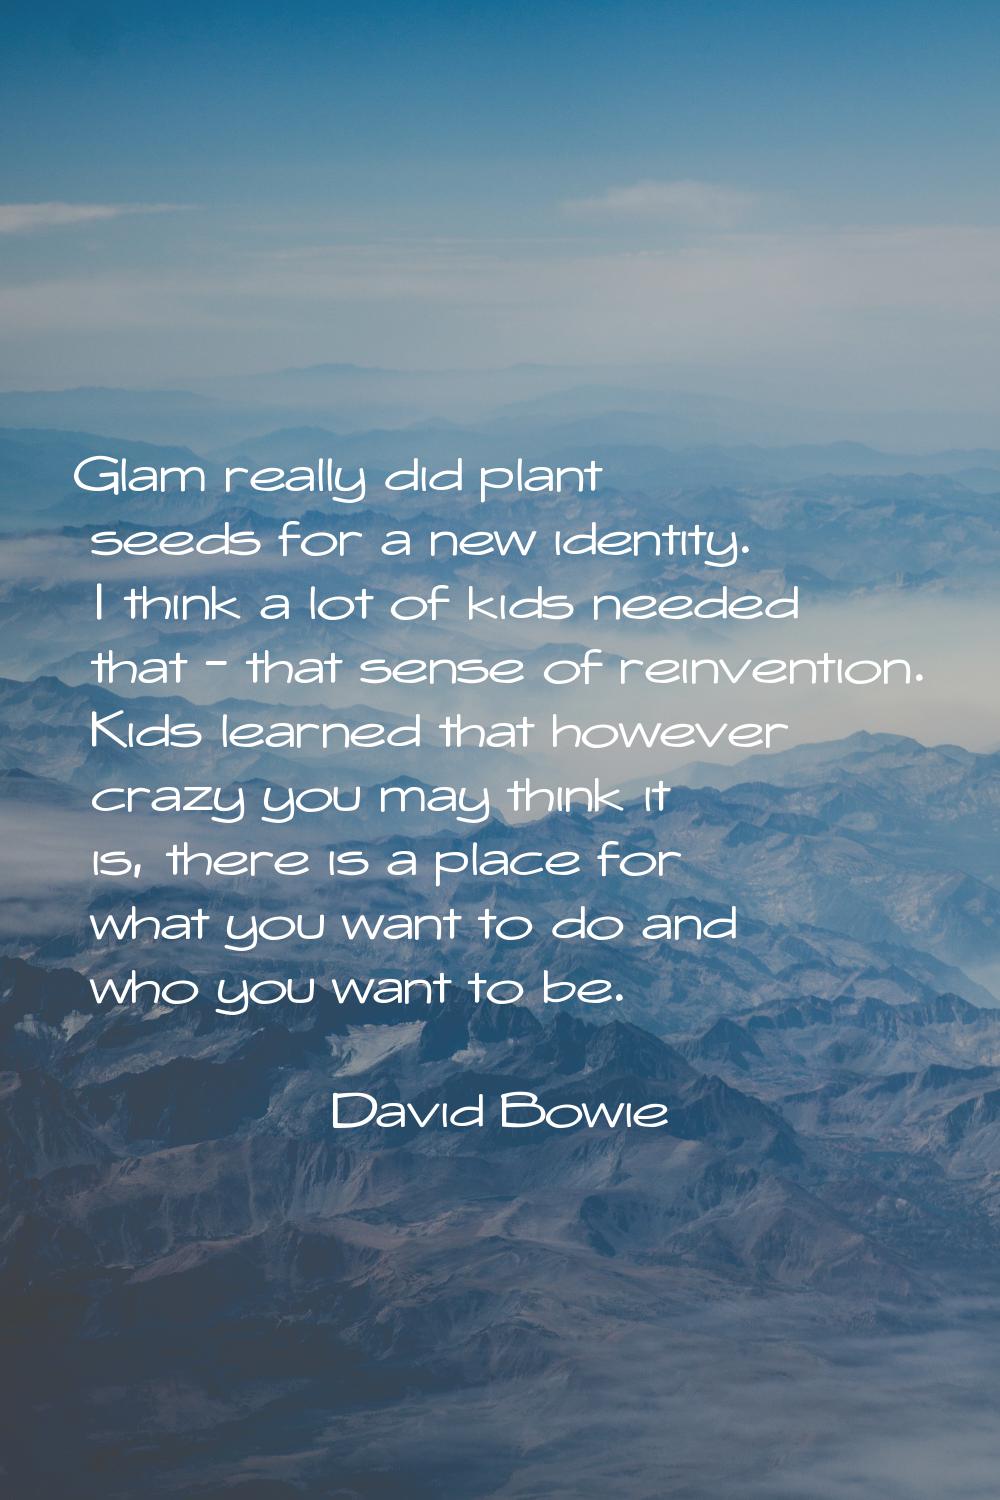 Glam really did plant seeds for a new identity. I think a lot of kids needed that - that sense of r